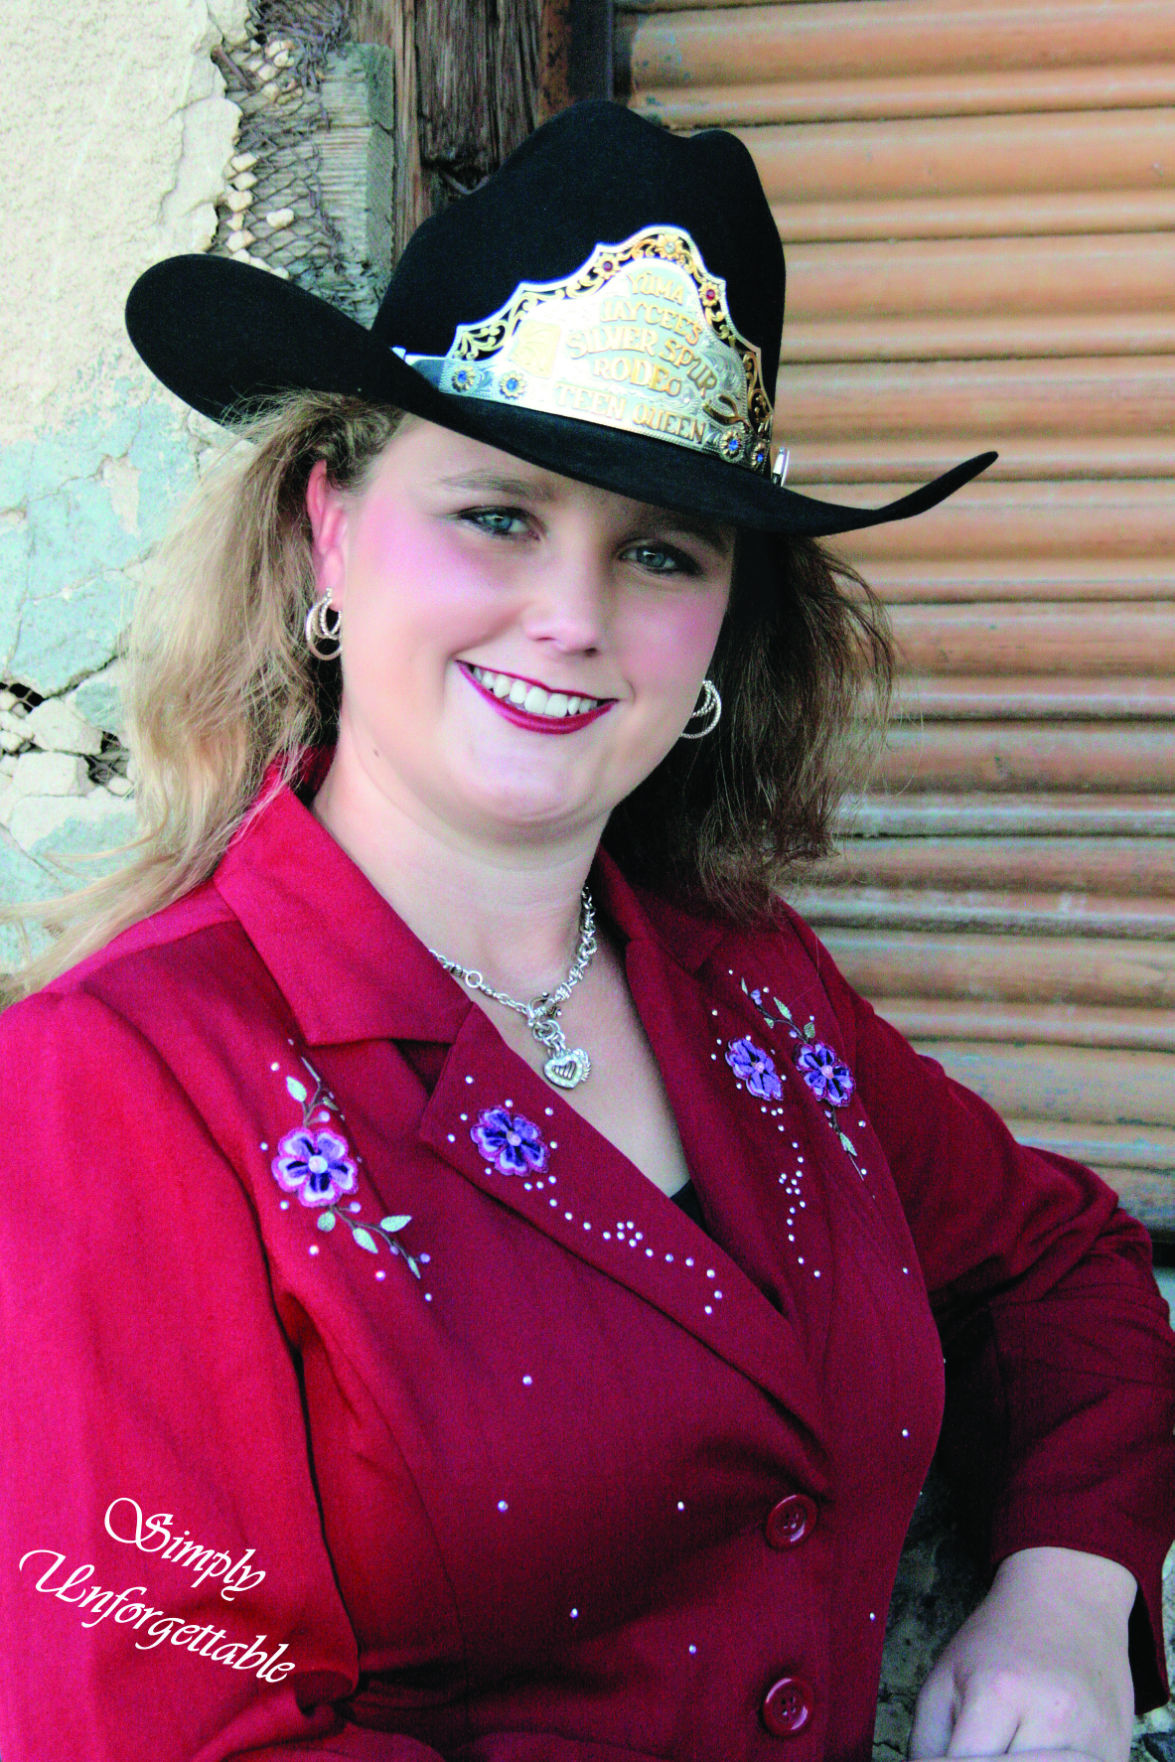 Yuma Jaycees Silver Spur Rodeo queens hit the job trotting | Features ...